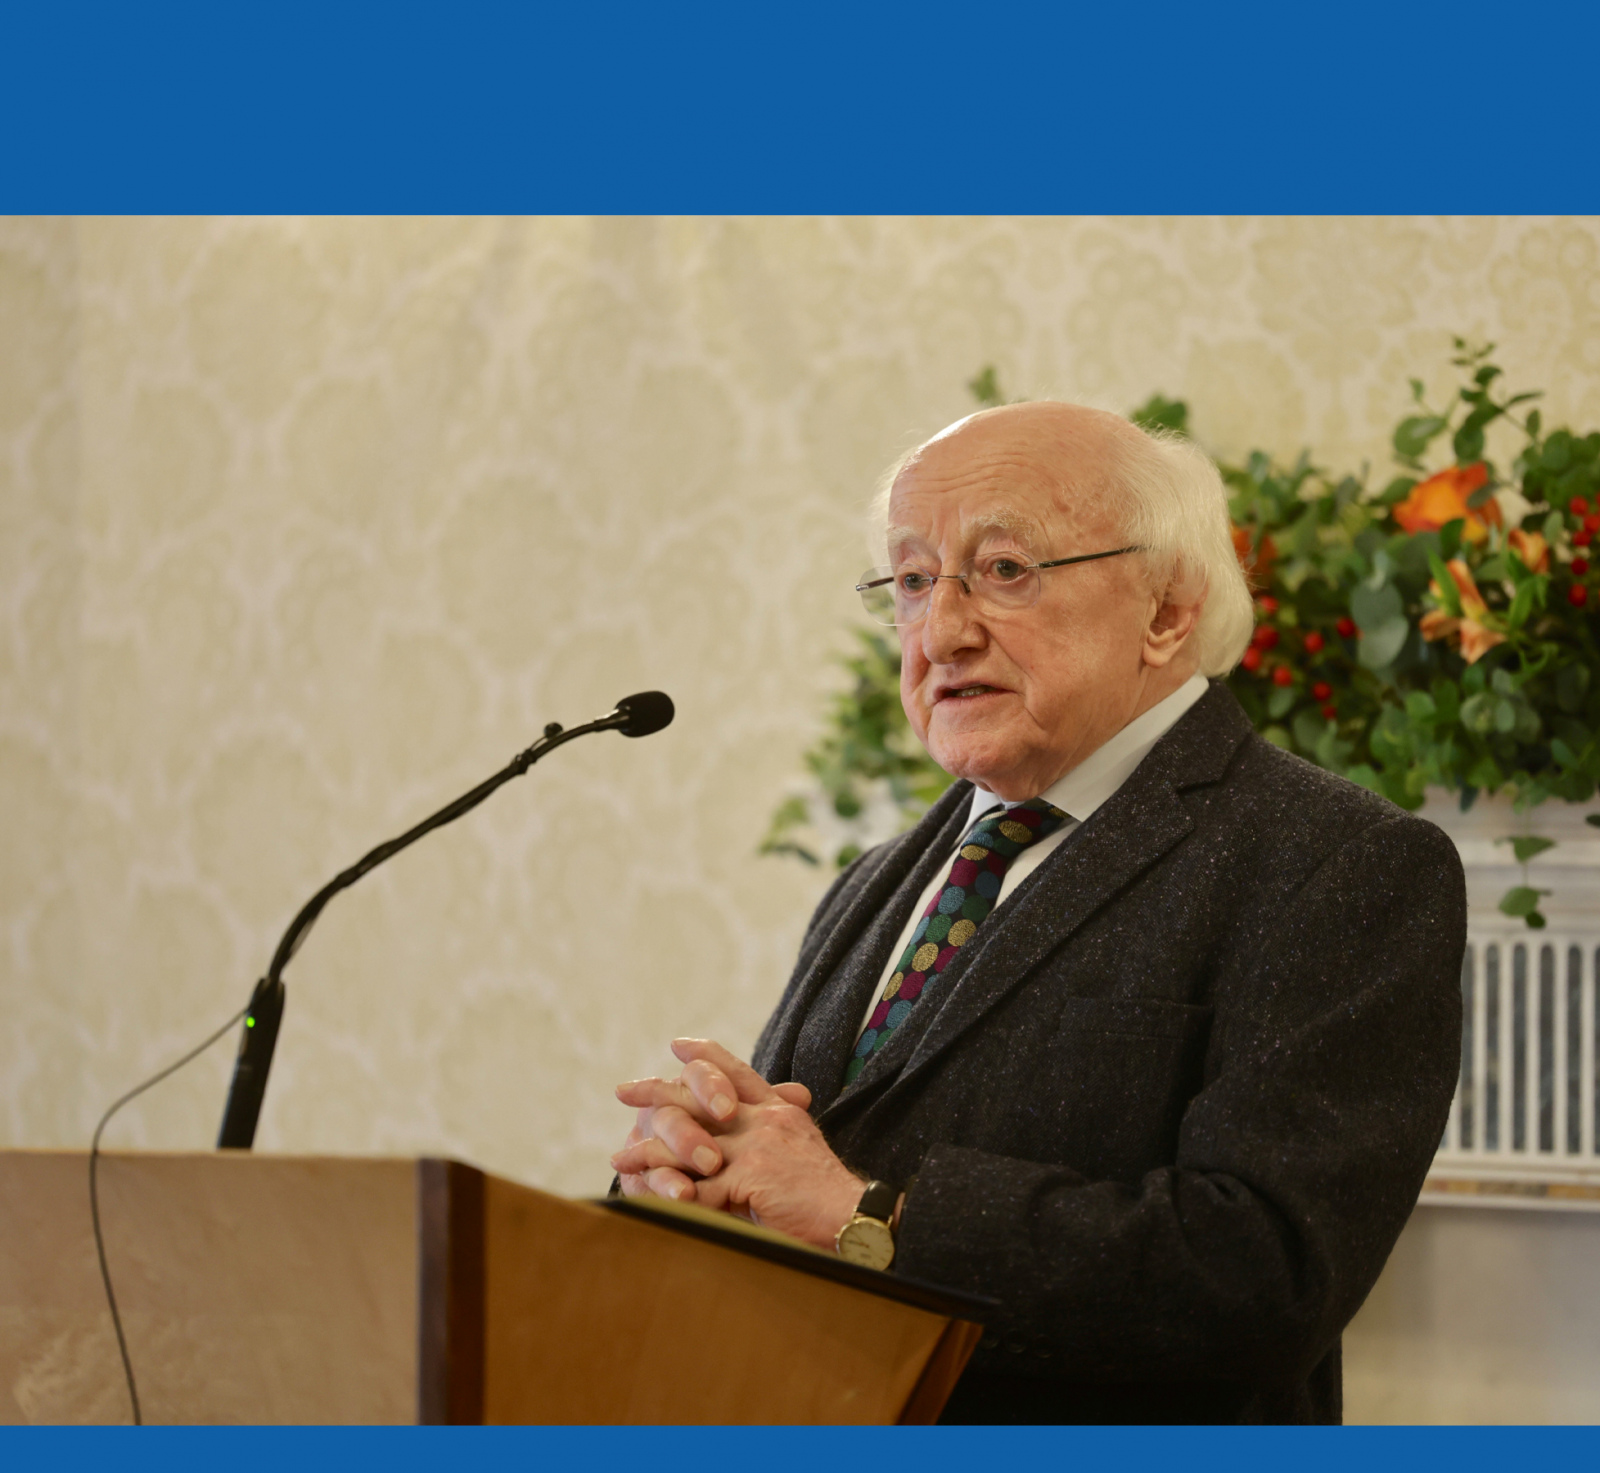 Statement by President Higgins following UN Security Council motion on Gaza